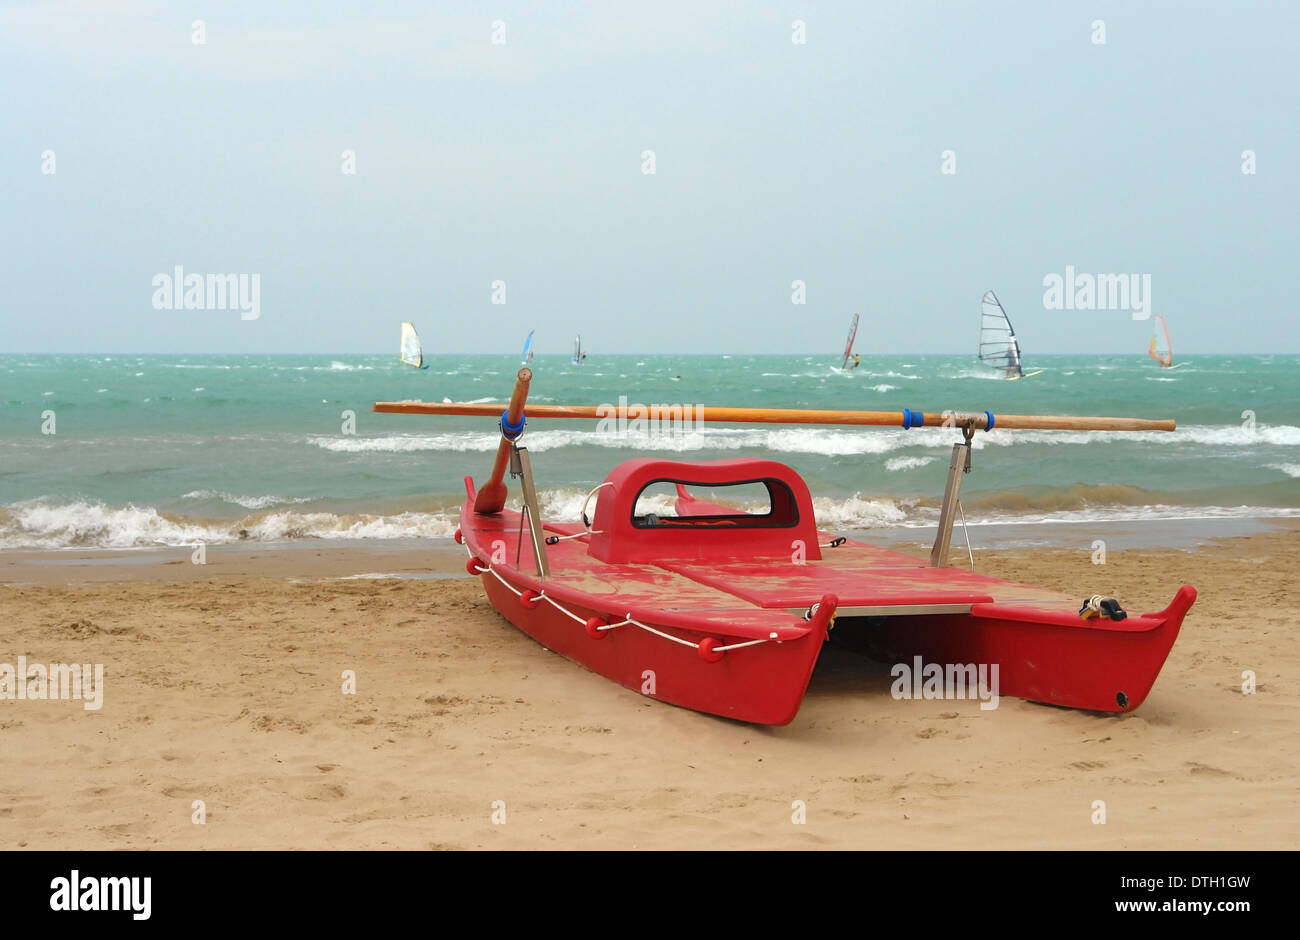 holiday scenery showing a red boat and surfers at a beach in Southern Italy Stock Photo